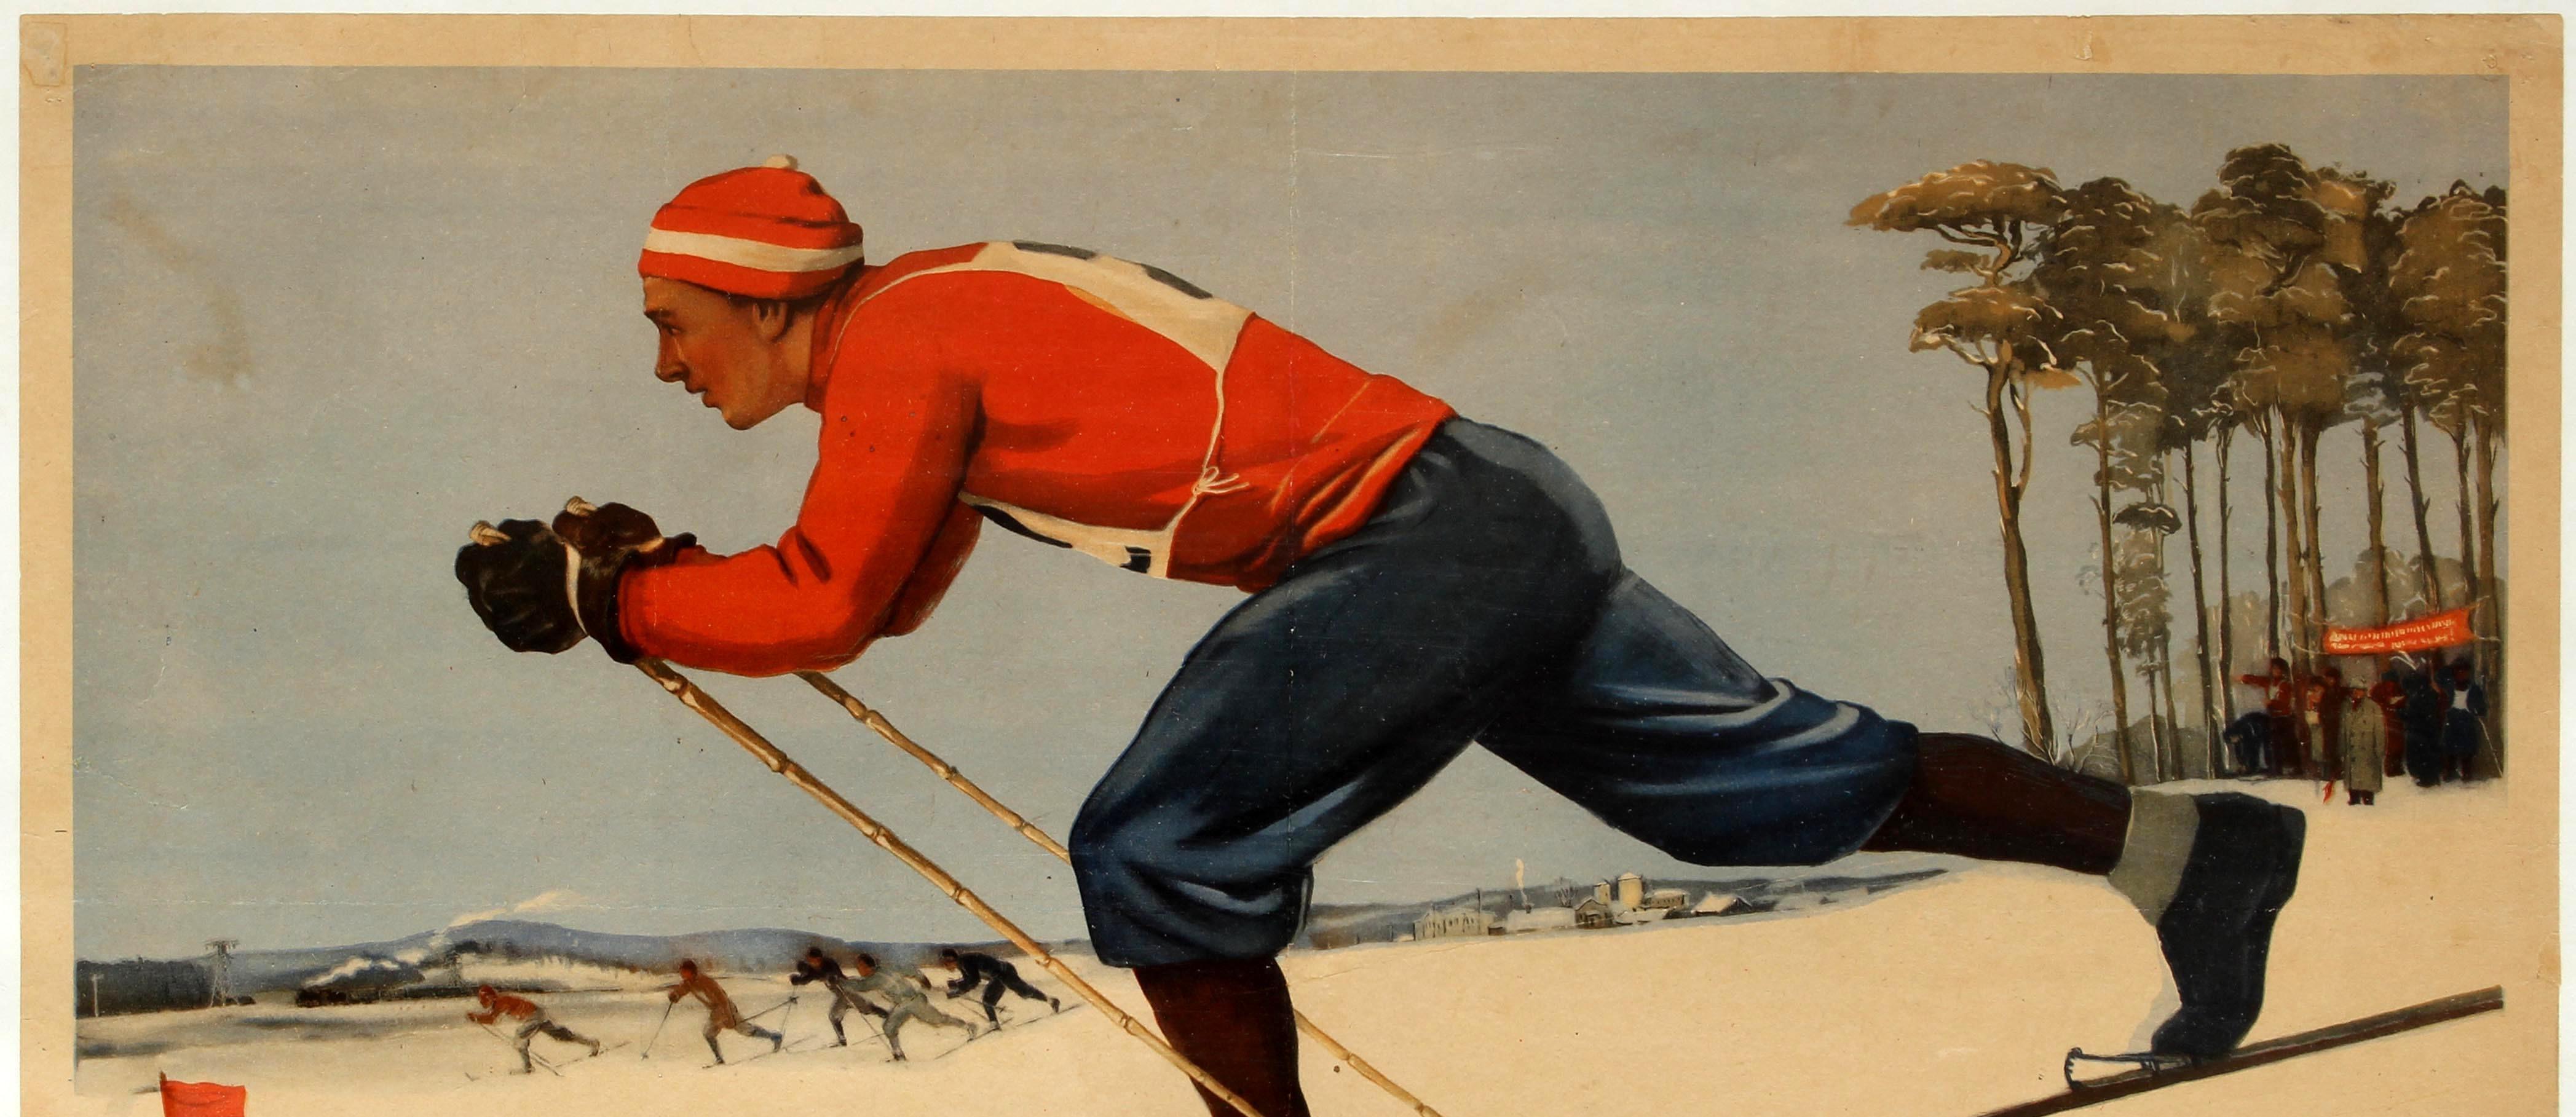 Original vintage Soviet sport propaganda poster - Youth Go Ski - featuring a great illustration of a man in a red jersey and bib, red and white winter hat and blue trousers cross country skiing with wooden ski poles across the snow in front of other